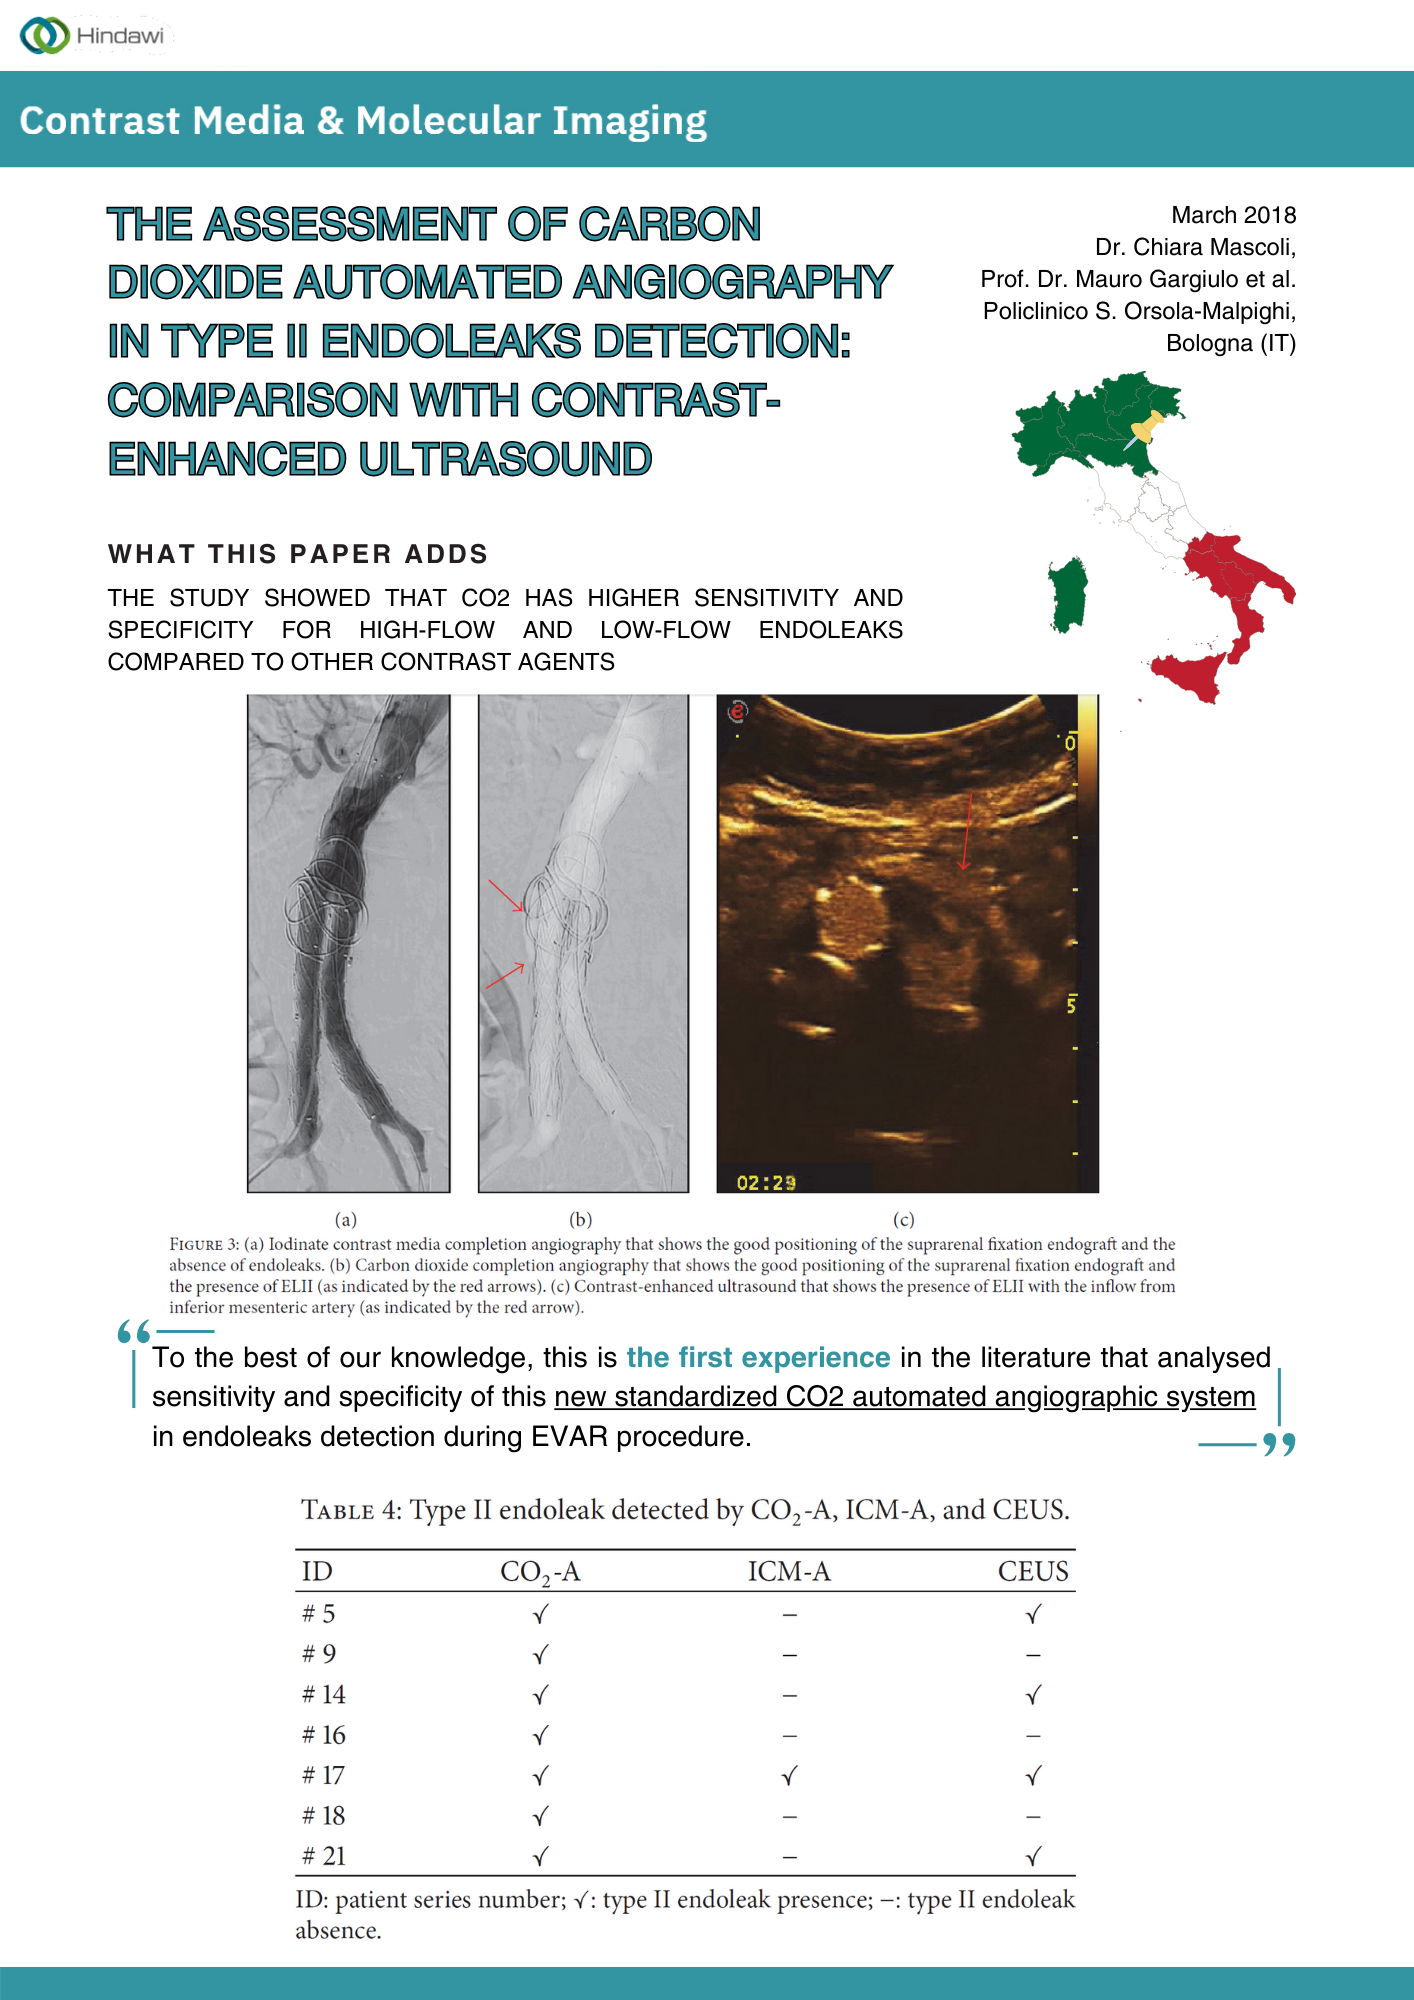 The Assessment of CO2 Automated Angiography in Type II Endoleaks Detection